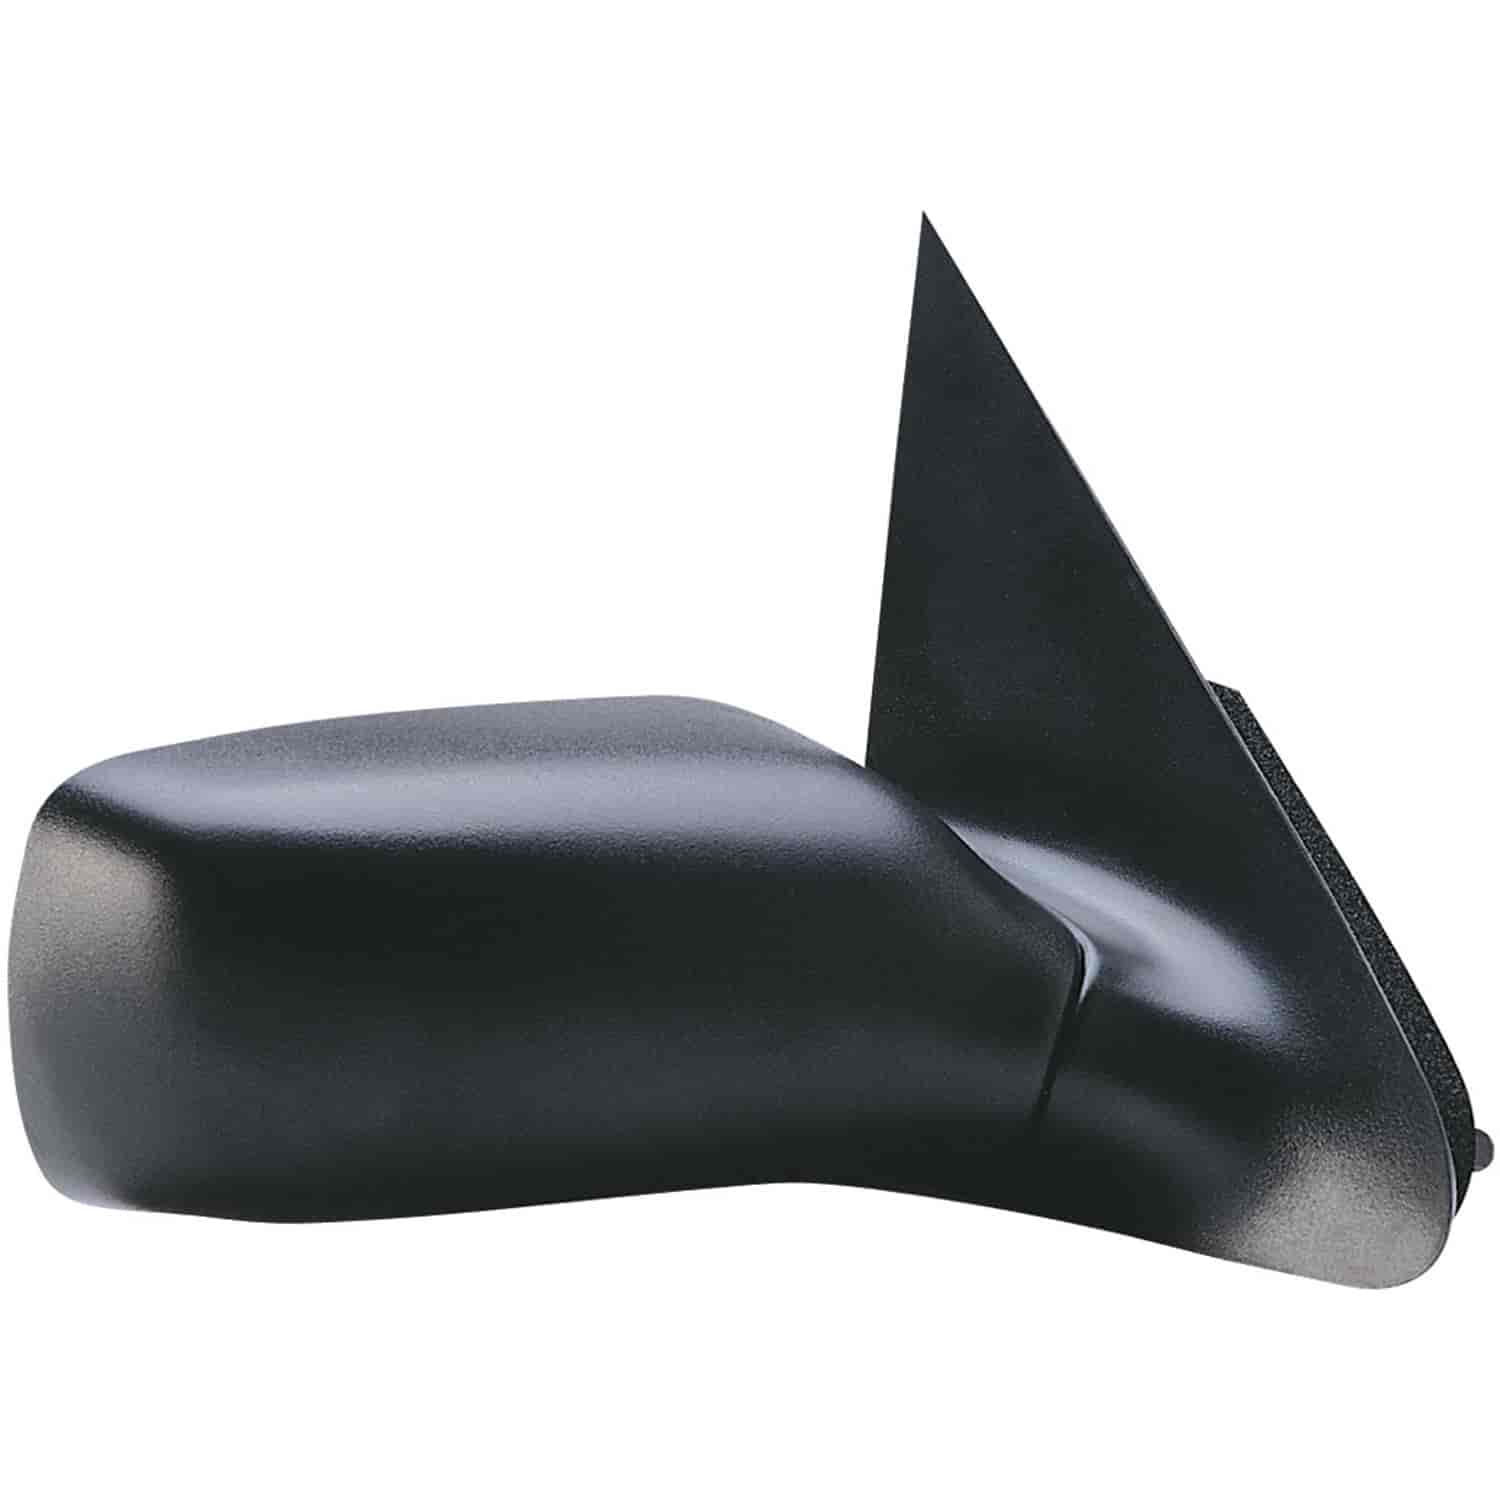 OEM Style Replacement mirror for 97-00 Ford Contou Mercury Mystique passenger side mirror tested to